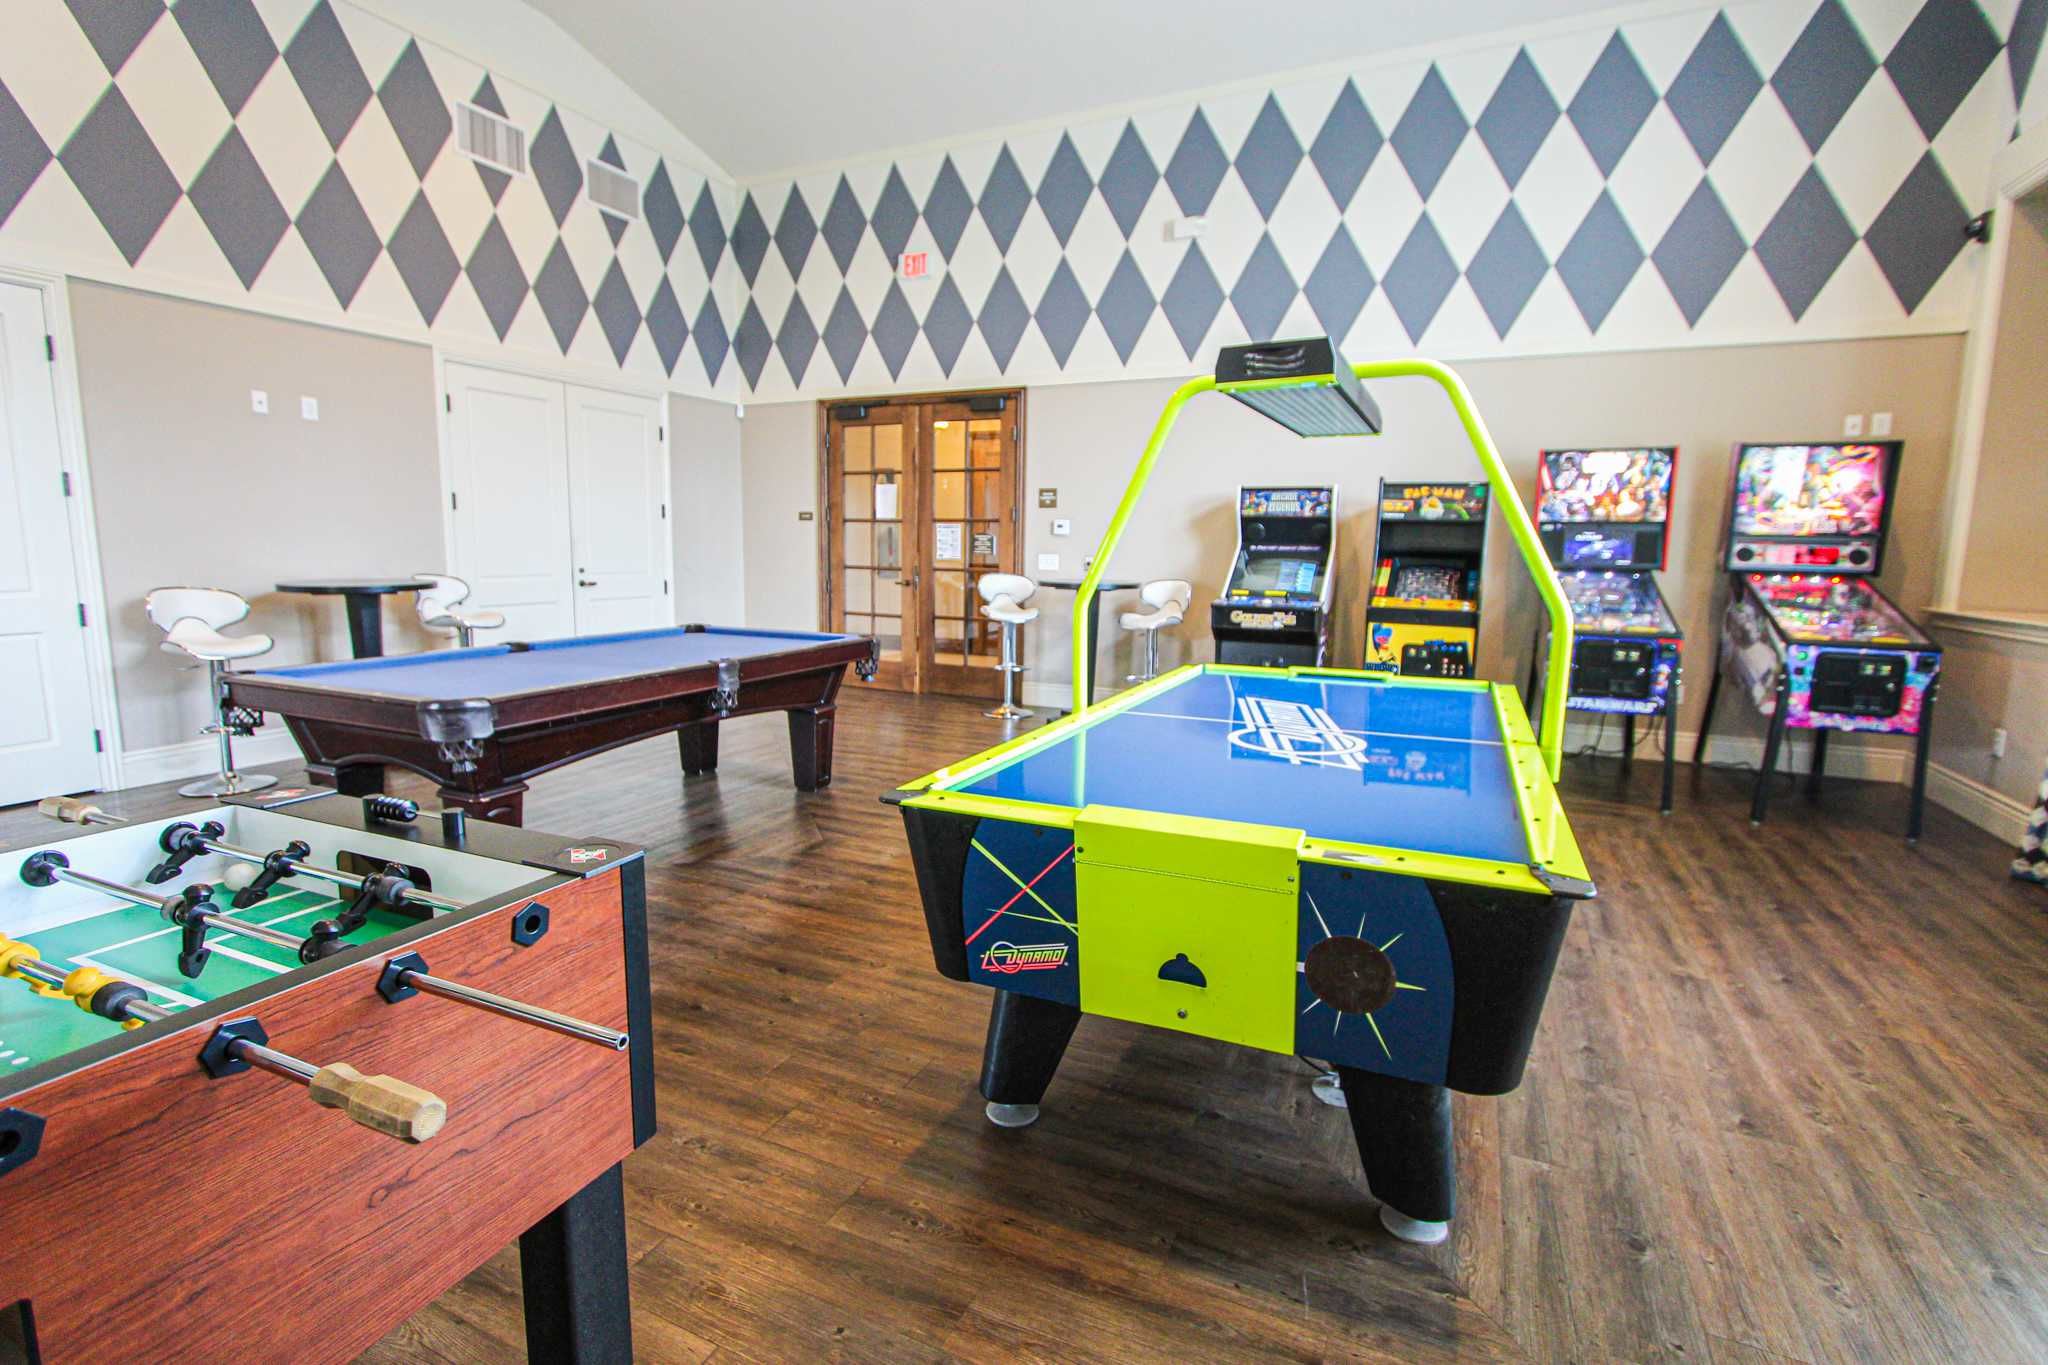 The game room at San Miguel in Point Mugu, California